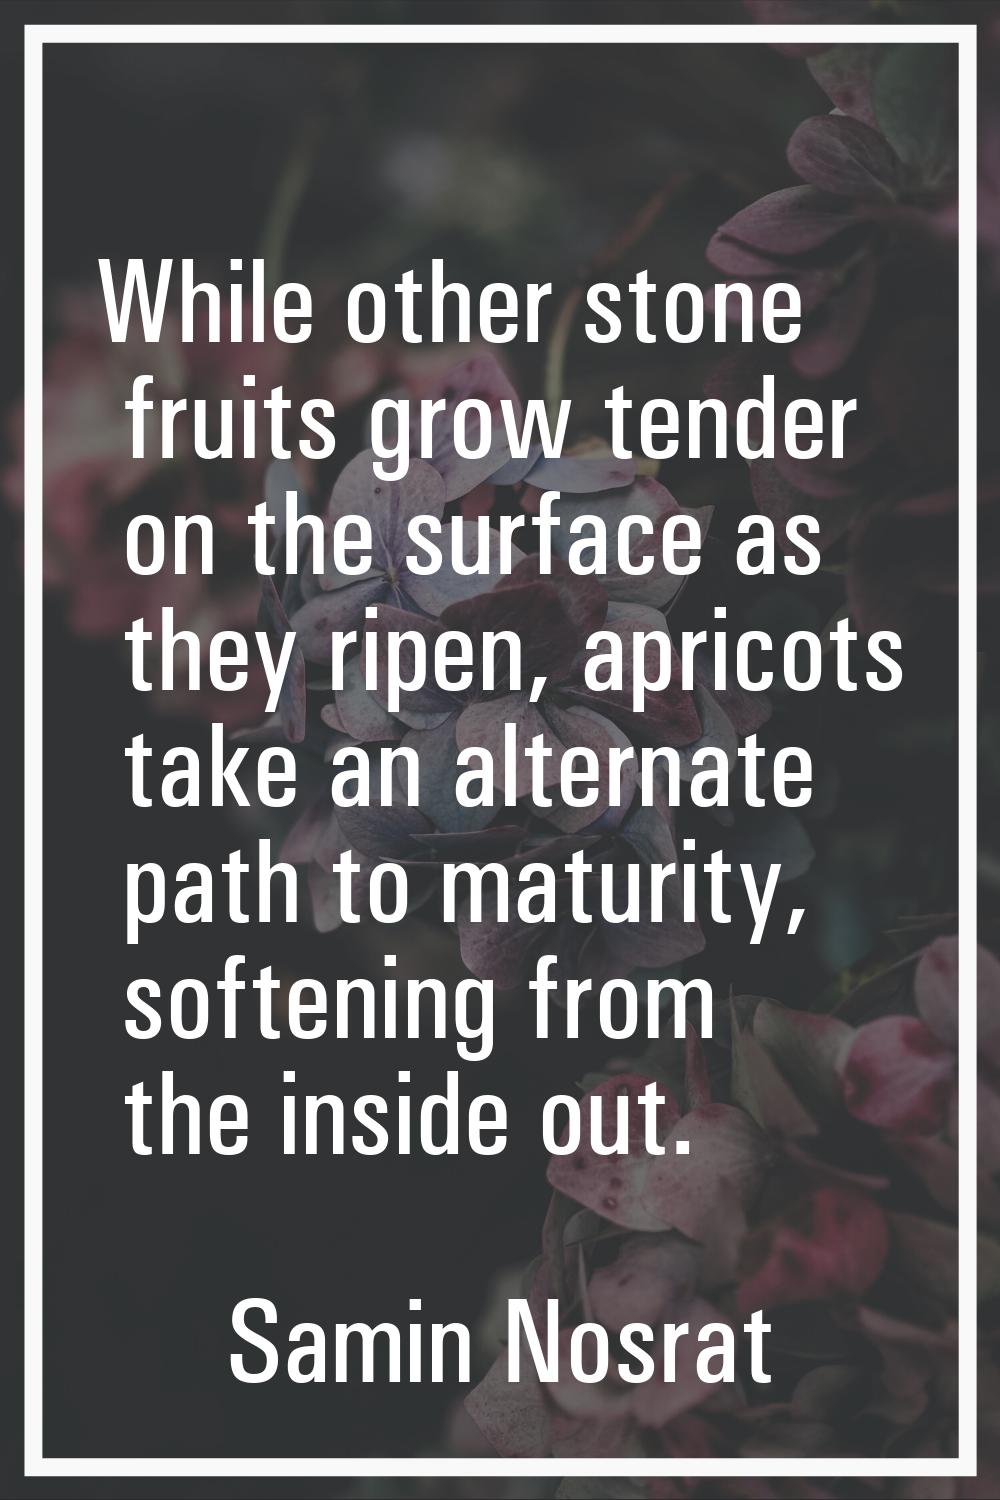 While other stone fruits grow tender on the surface as they ripen, apricots take an alternate path 